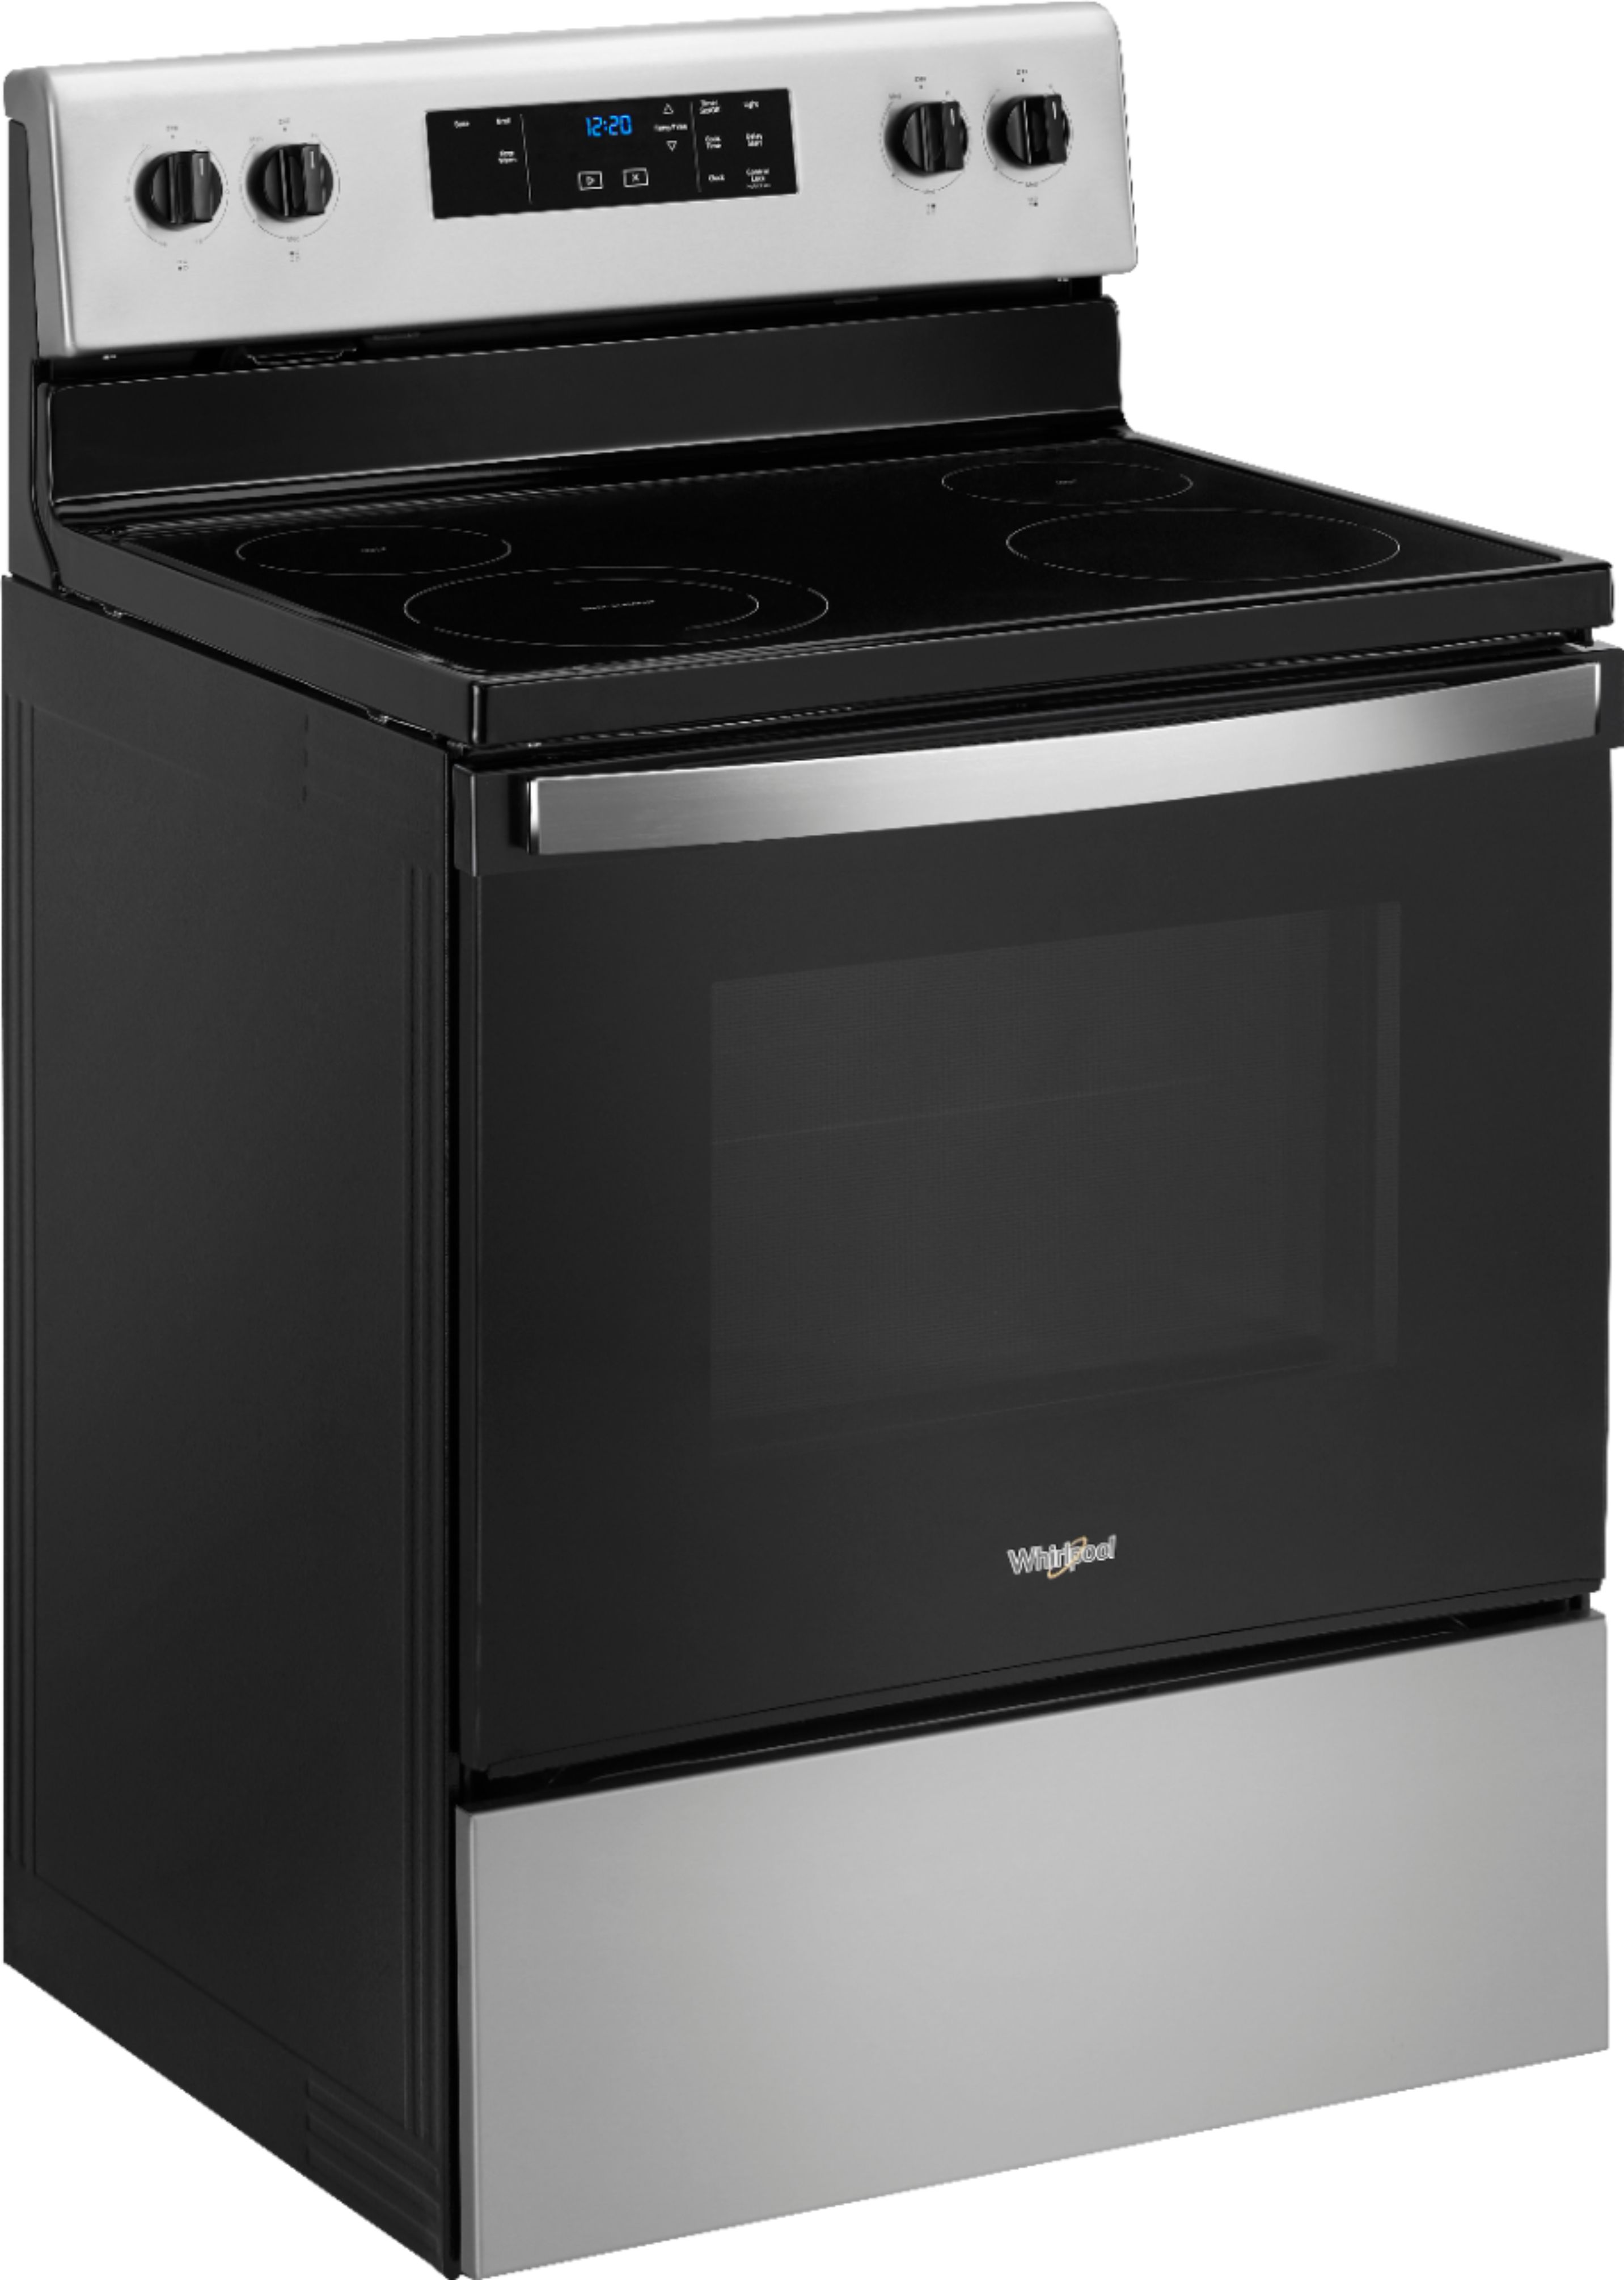 Angle View: Whirlpool - 5.3 Cu. Ft. Freestanding Electric Range with Keep Warm Setting - Stainless steel